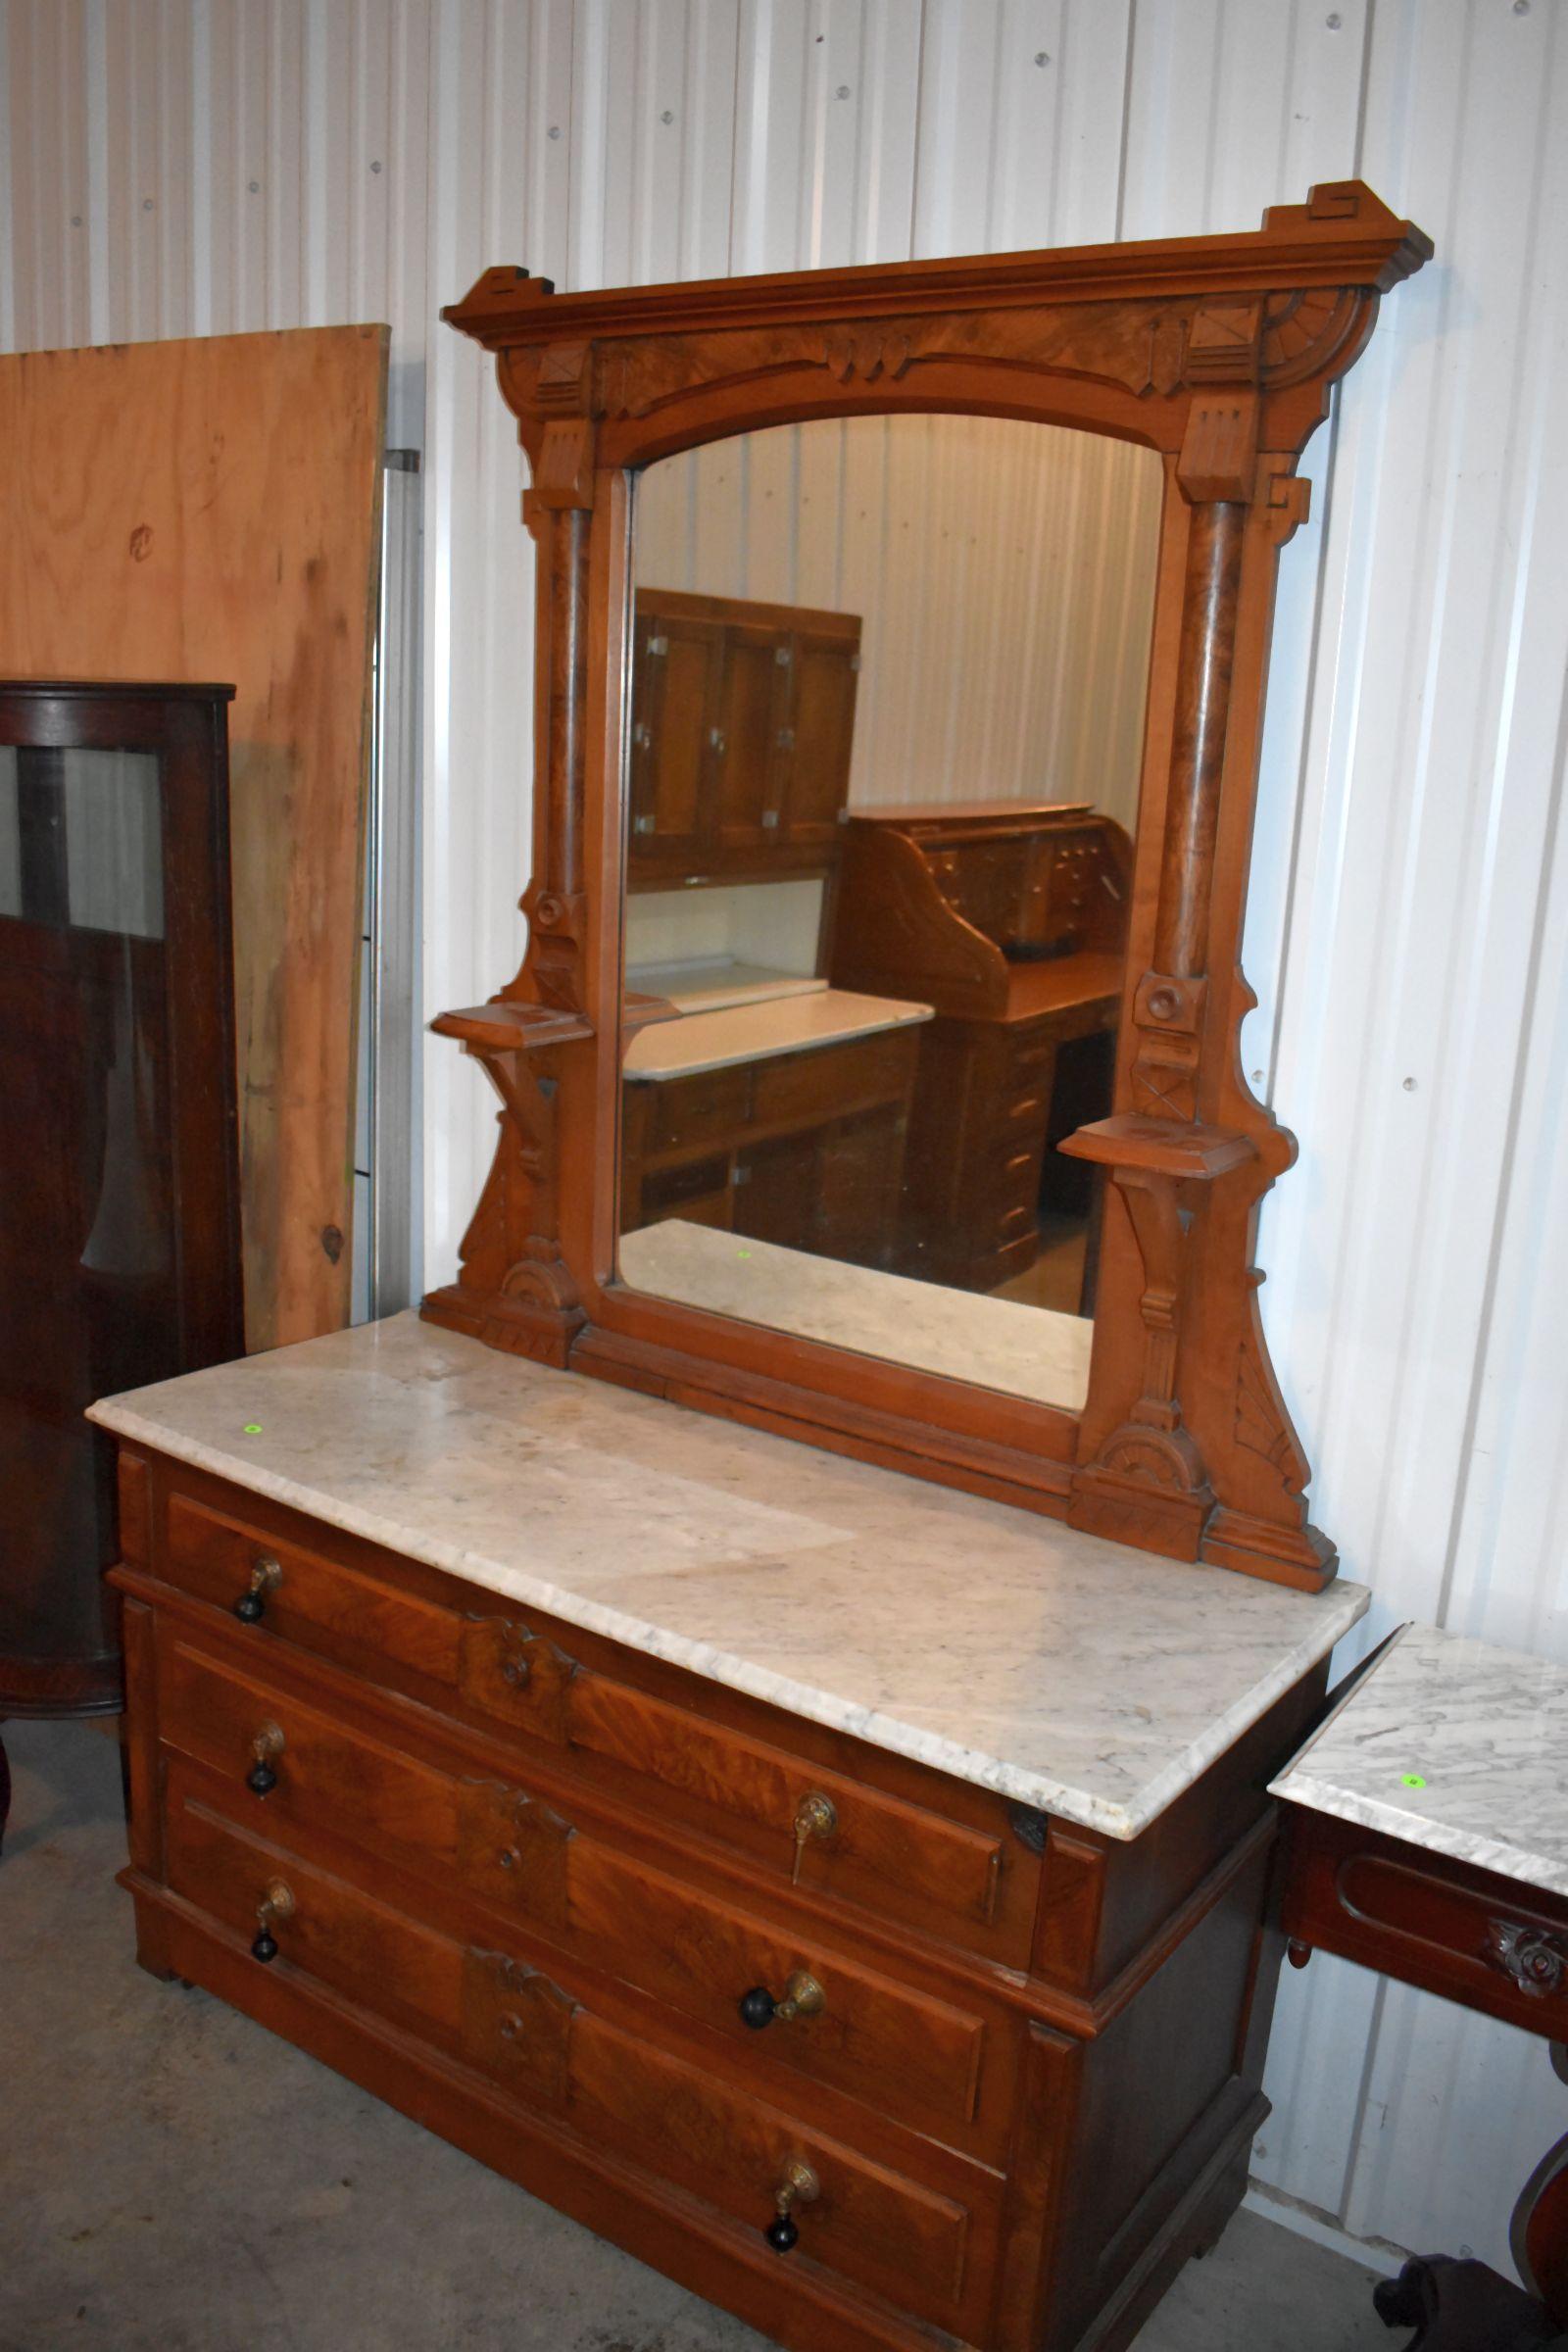 Fancy Walnut Marble Top Mirrored Dresser, 3-Drawer, Very Nice Condition, 52" Wide, 84" Tall